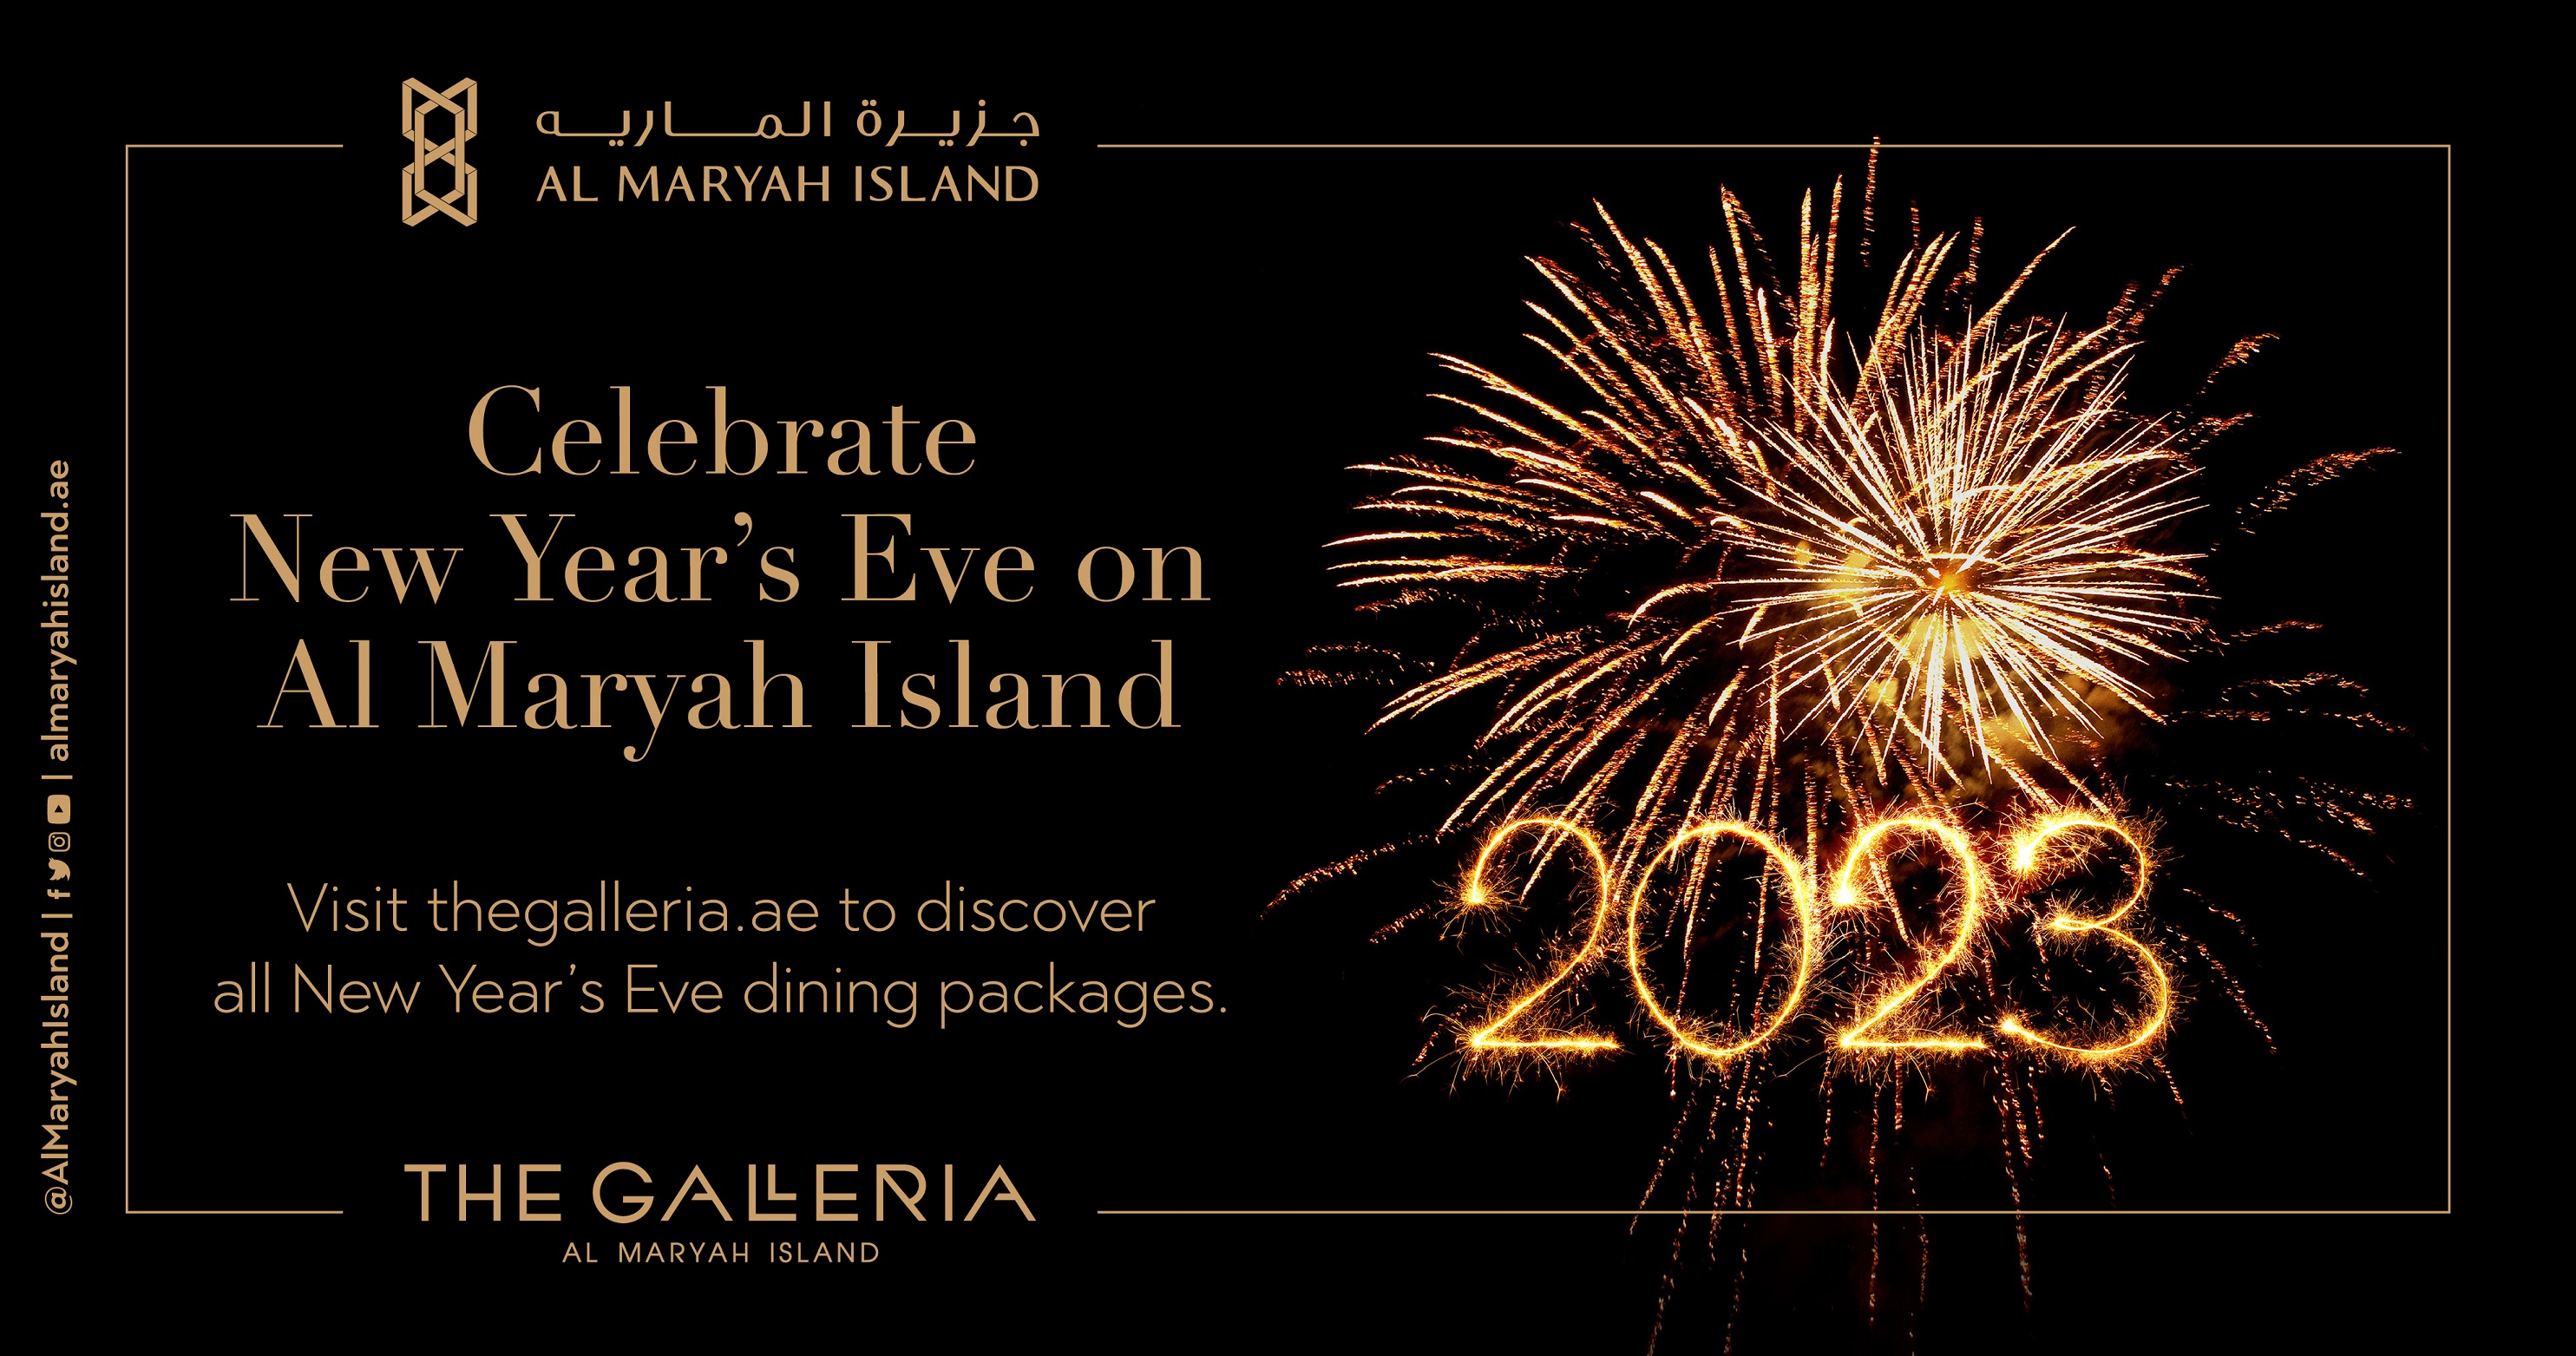 Fine Dining, Fireworks, And Family Fun: Al Maryah Island To Host Spectacular New Year’s Eve Celebrations